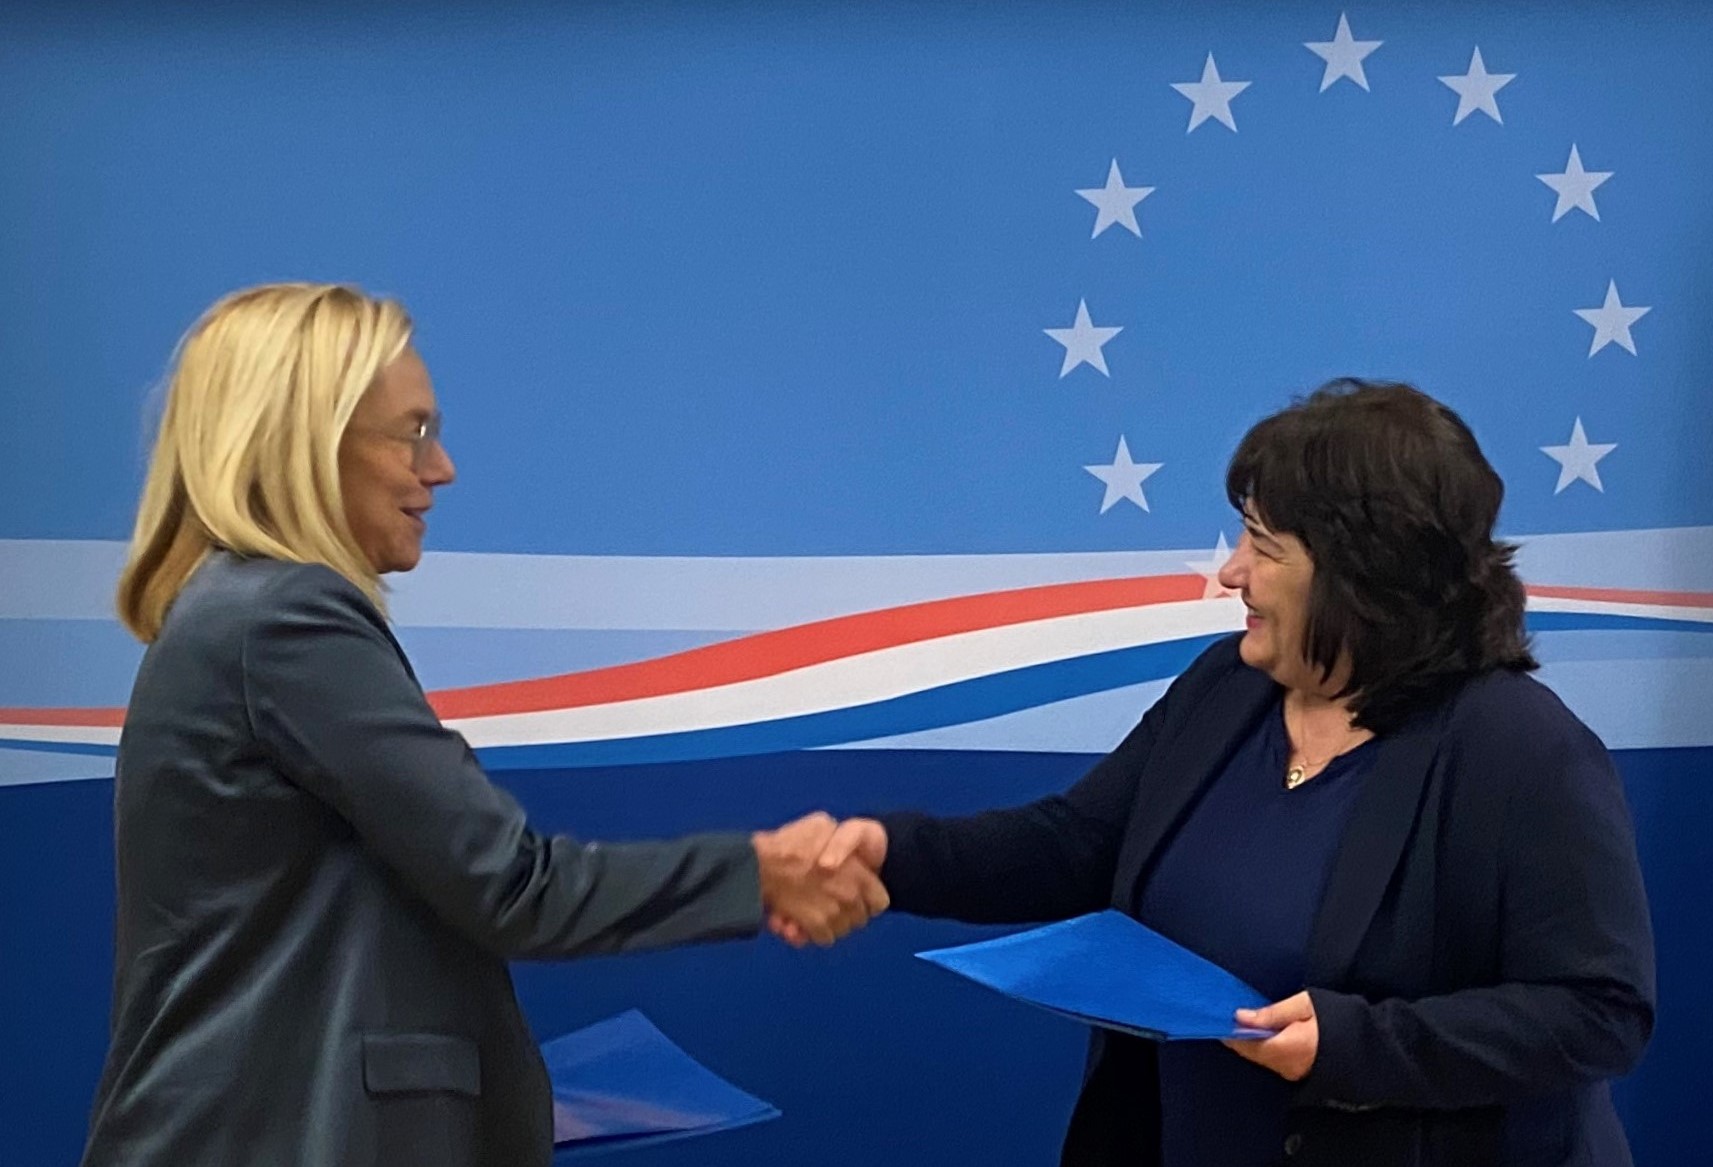 The Minister of Finance of the Republic of Bulgaria Mrs. Rositza Velkova and the Minister of Finance of the Kingdom of the Netherlands Mrs. Sigrid Kaag